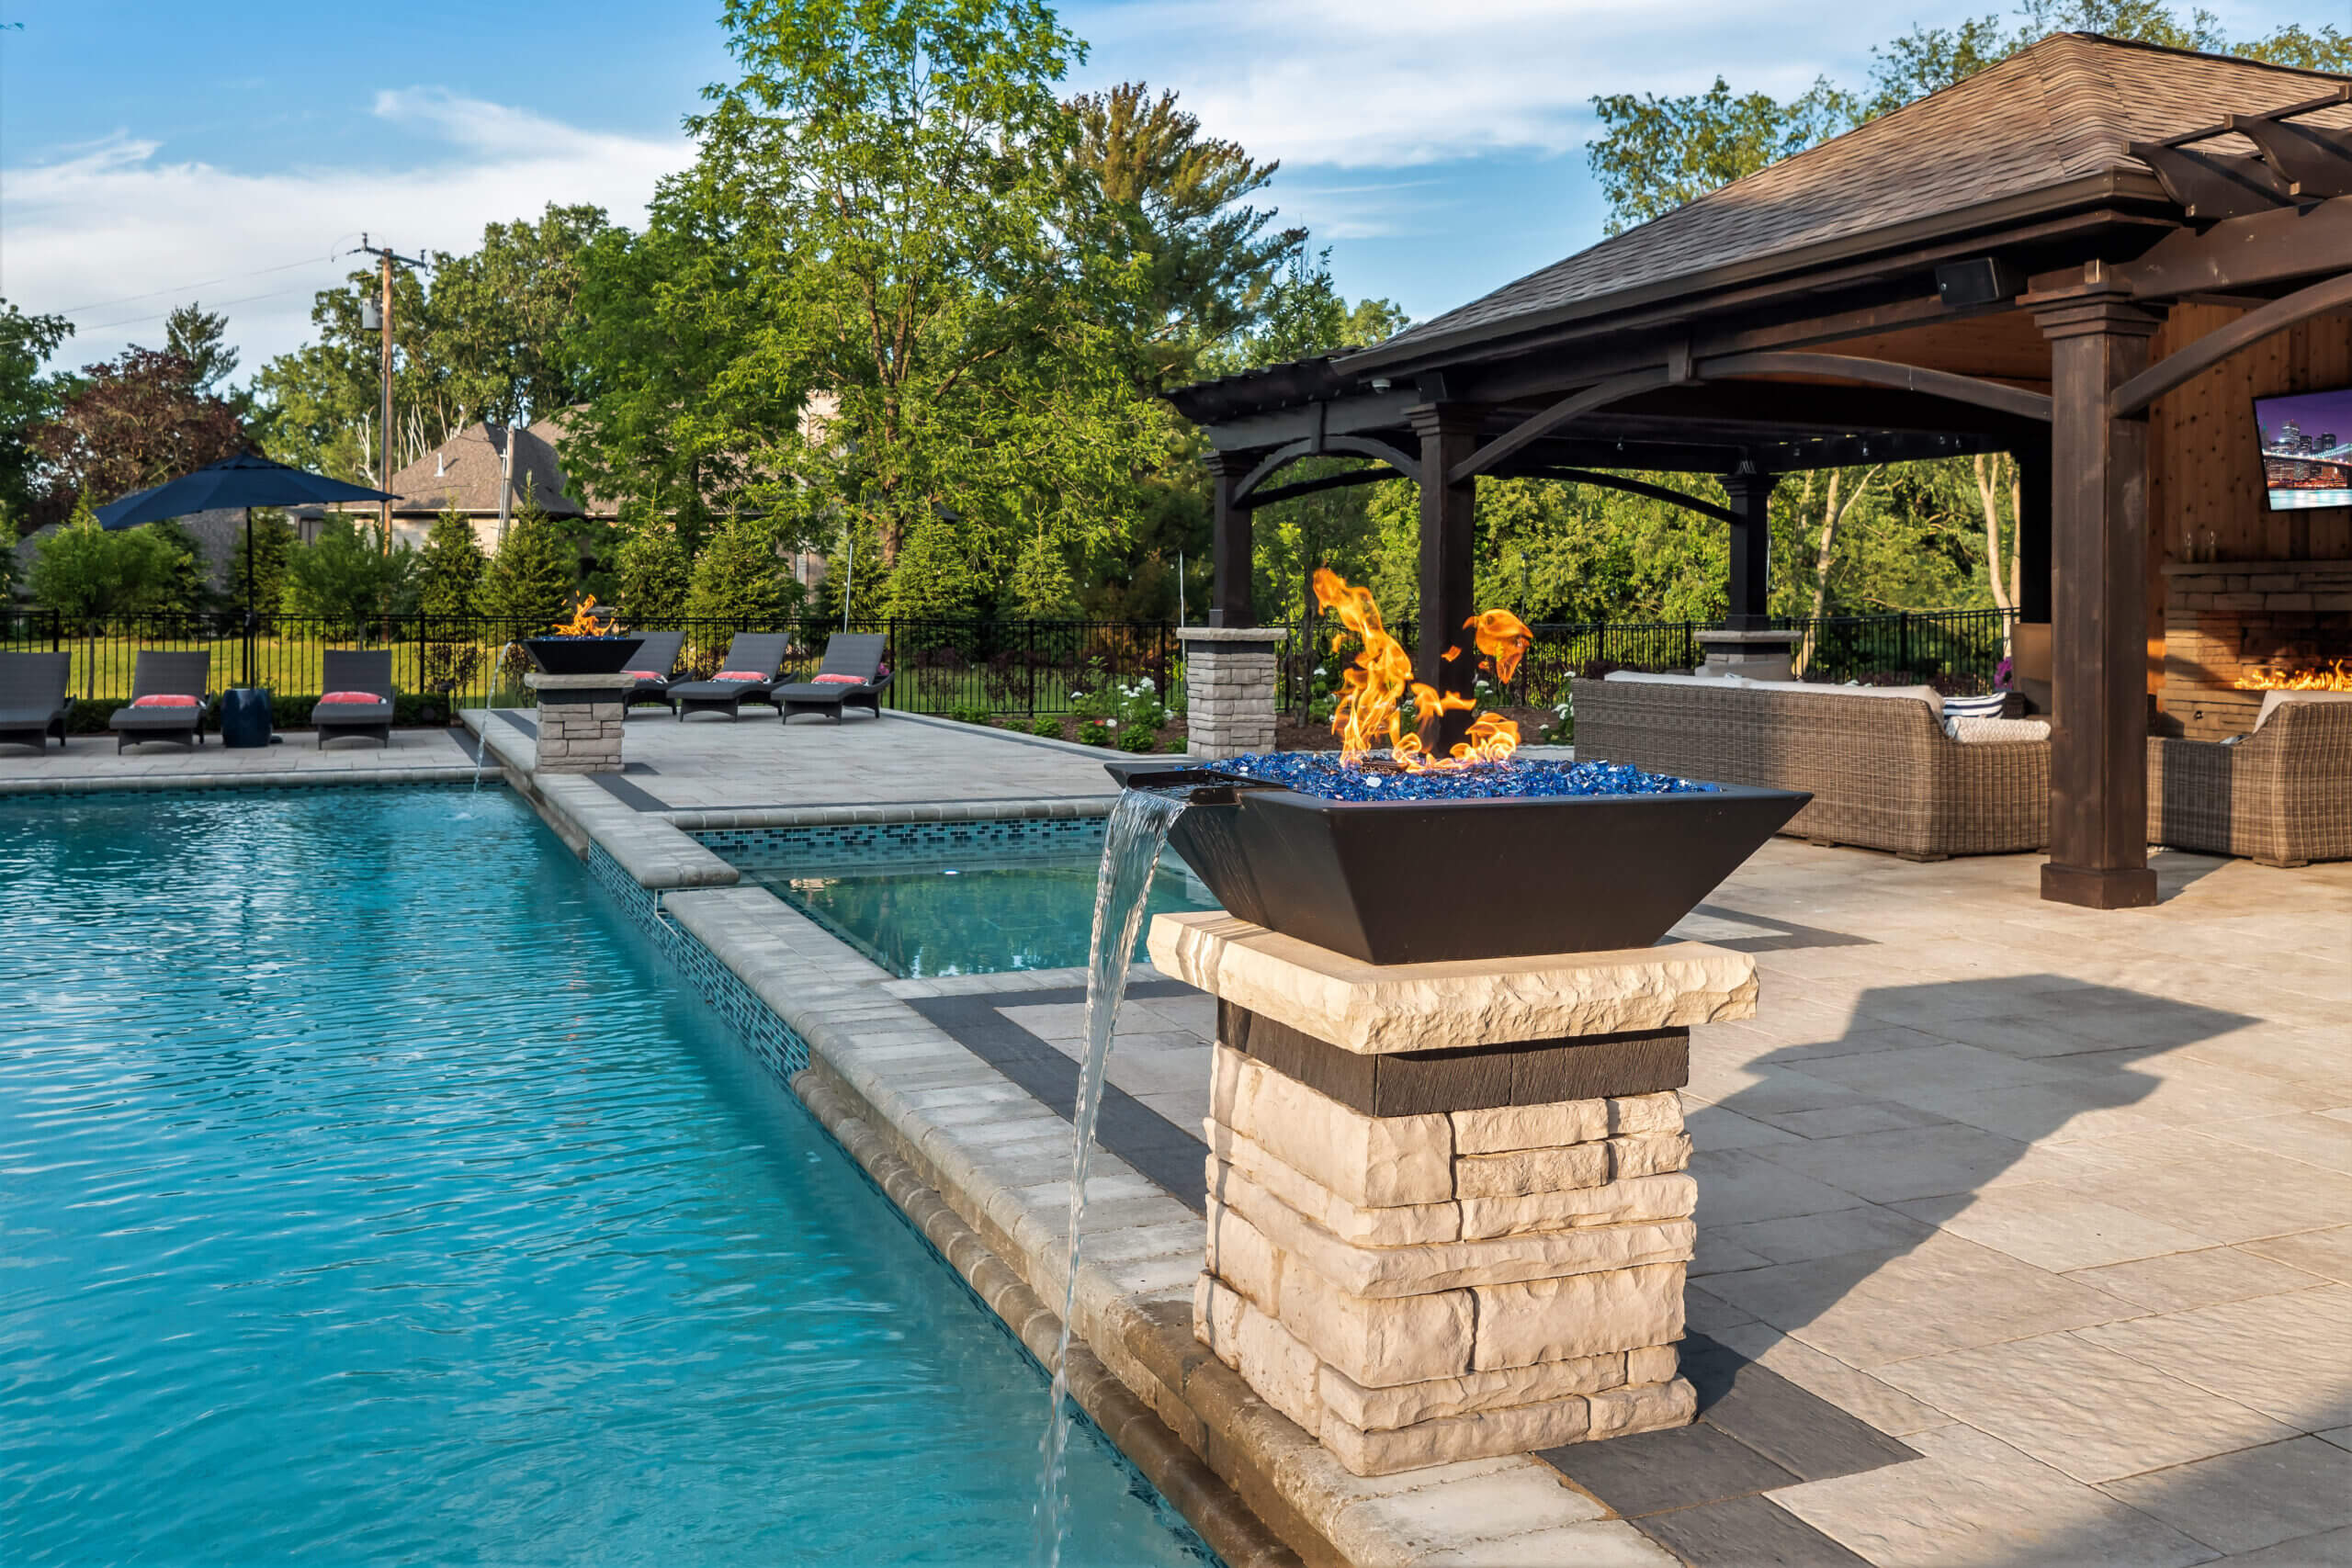 gunite pools, patio pavers, concrete paving, inground pools, pool and spa, fire bowls, patio covers in michigan, patio ideas, pool inspo, gazebos in michigan, cabanas in Michigan, backyard design, backyard landscape design, fire bowls, pool fountains, concrete builders, unilock